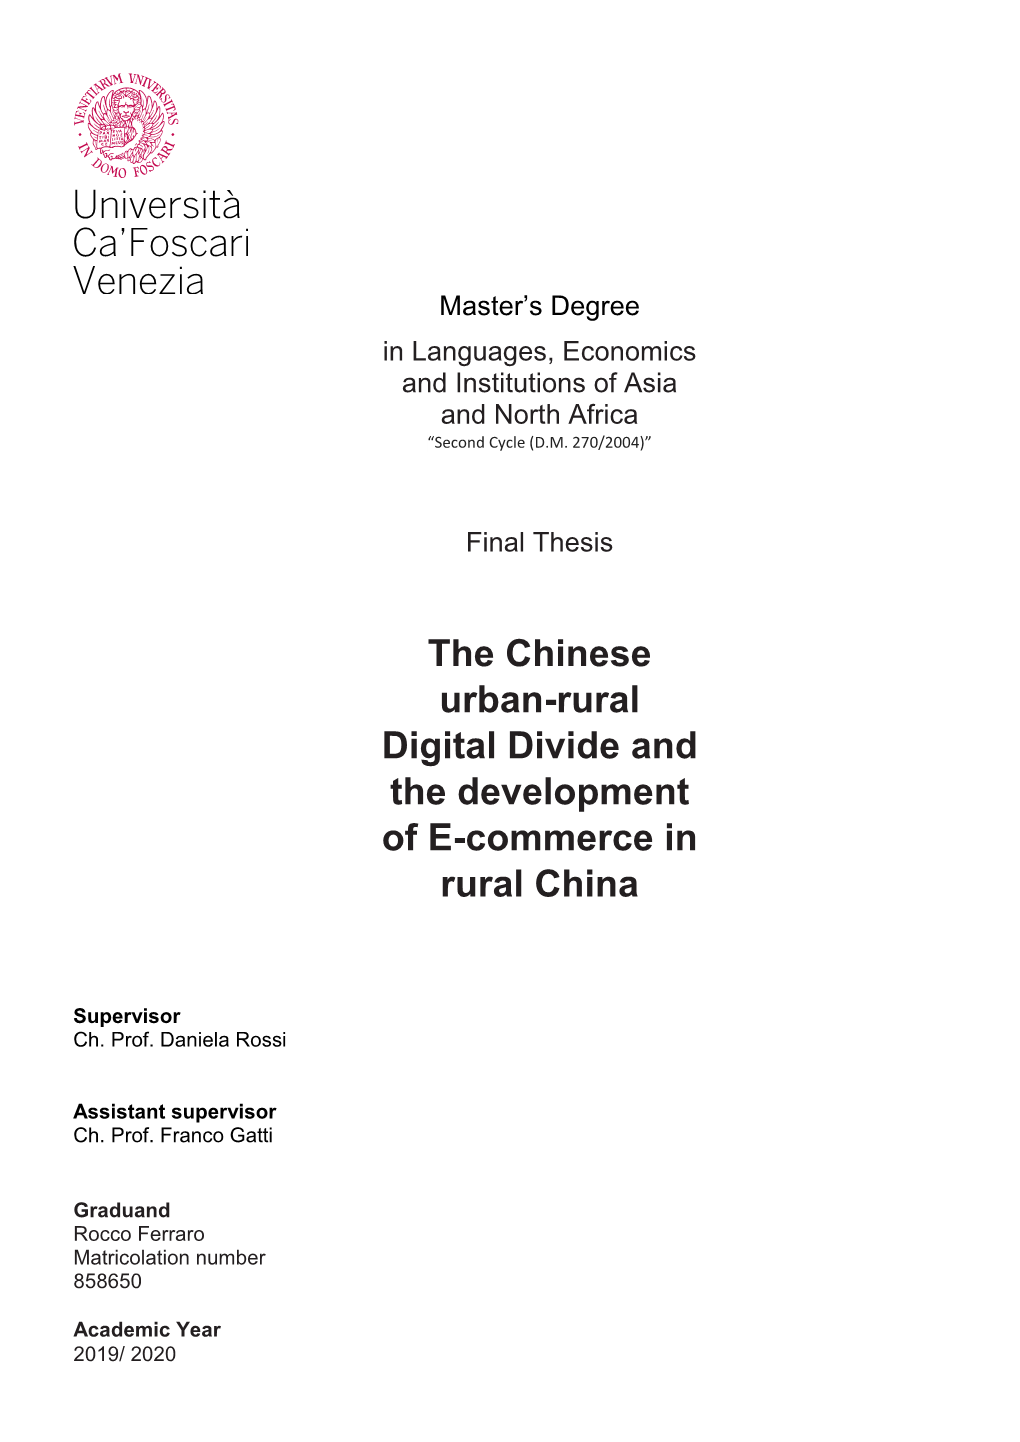 The Chinese Urban-Rural Digital Divide and the Development of E-Commerce in Rural China